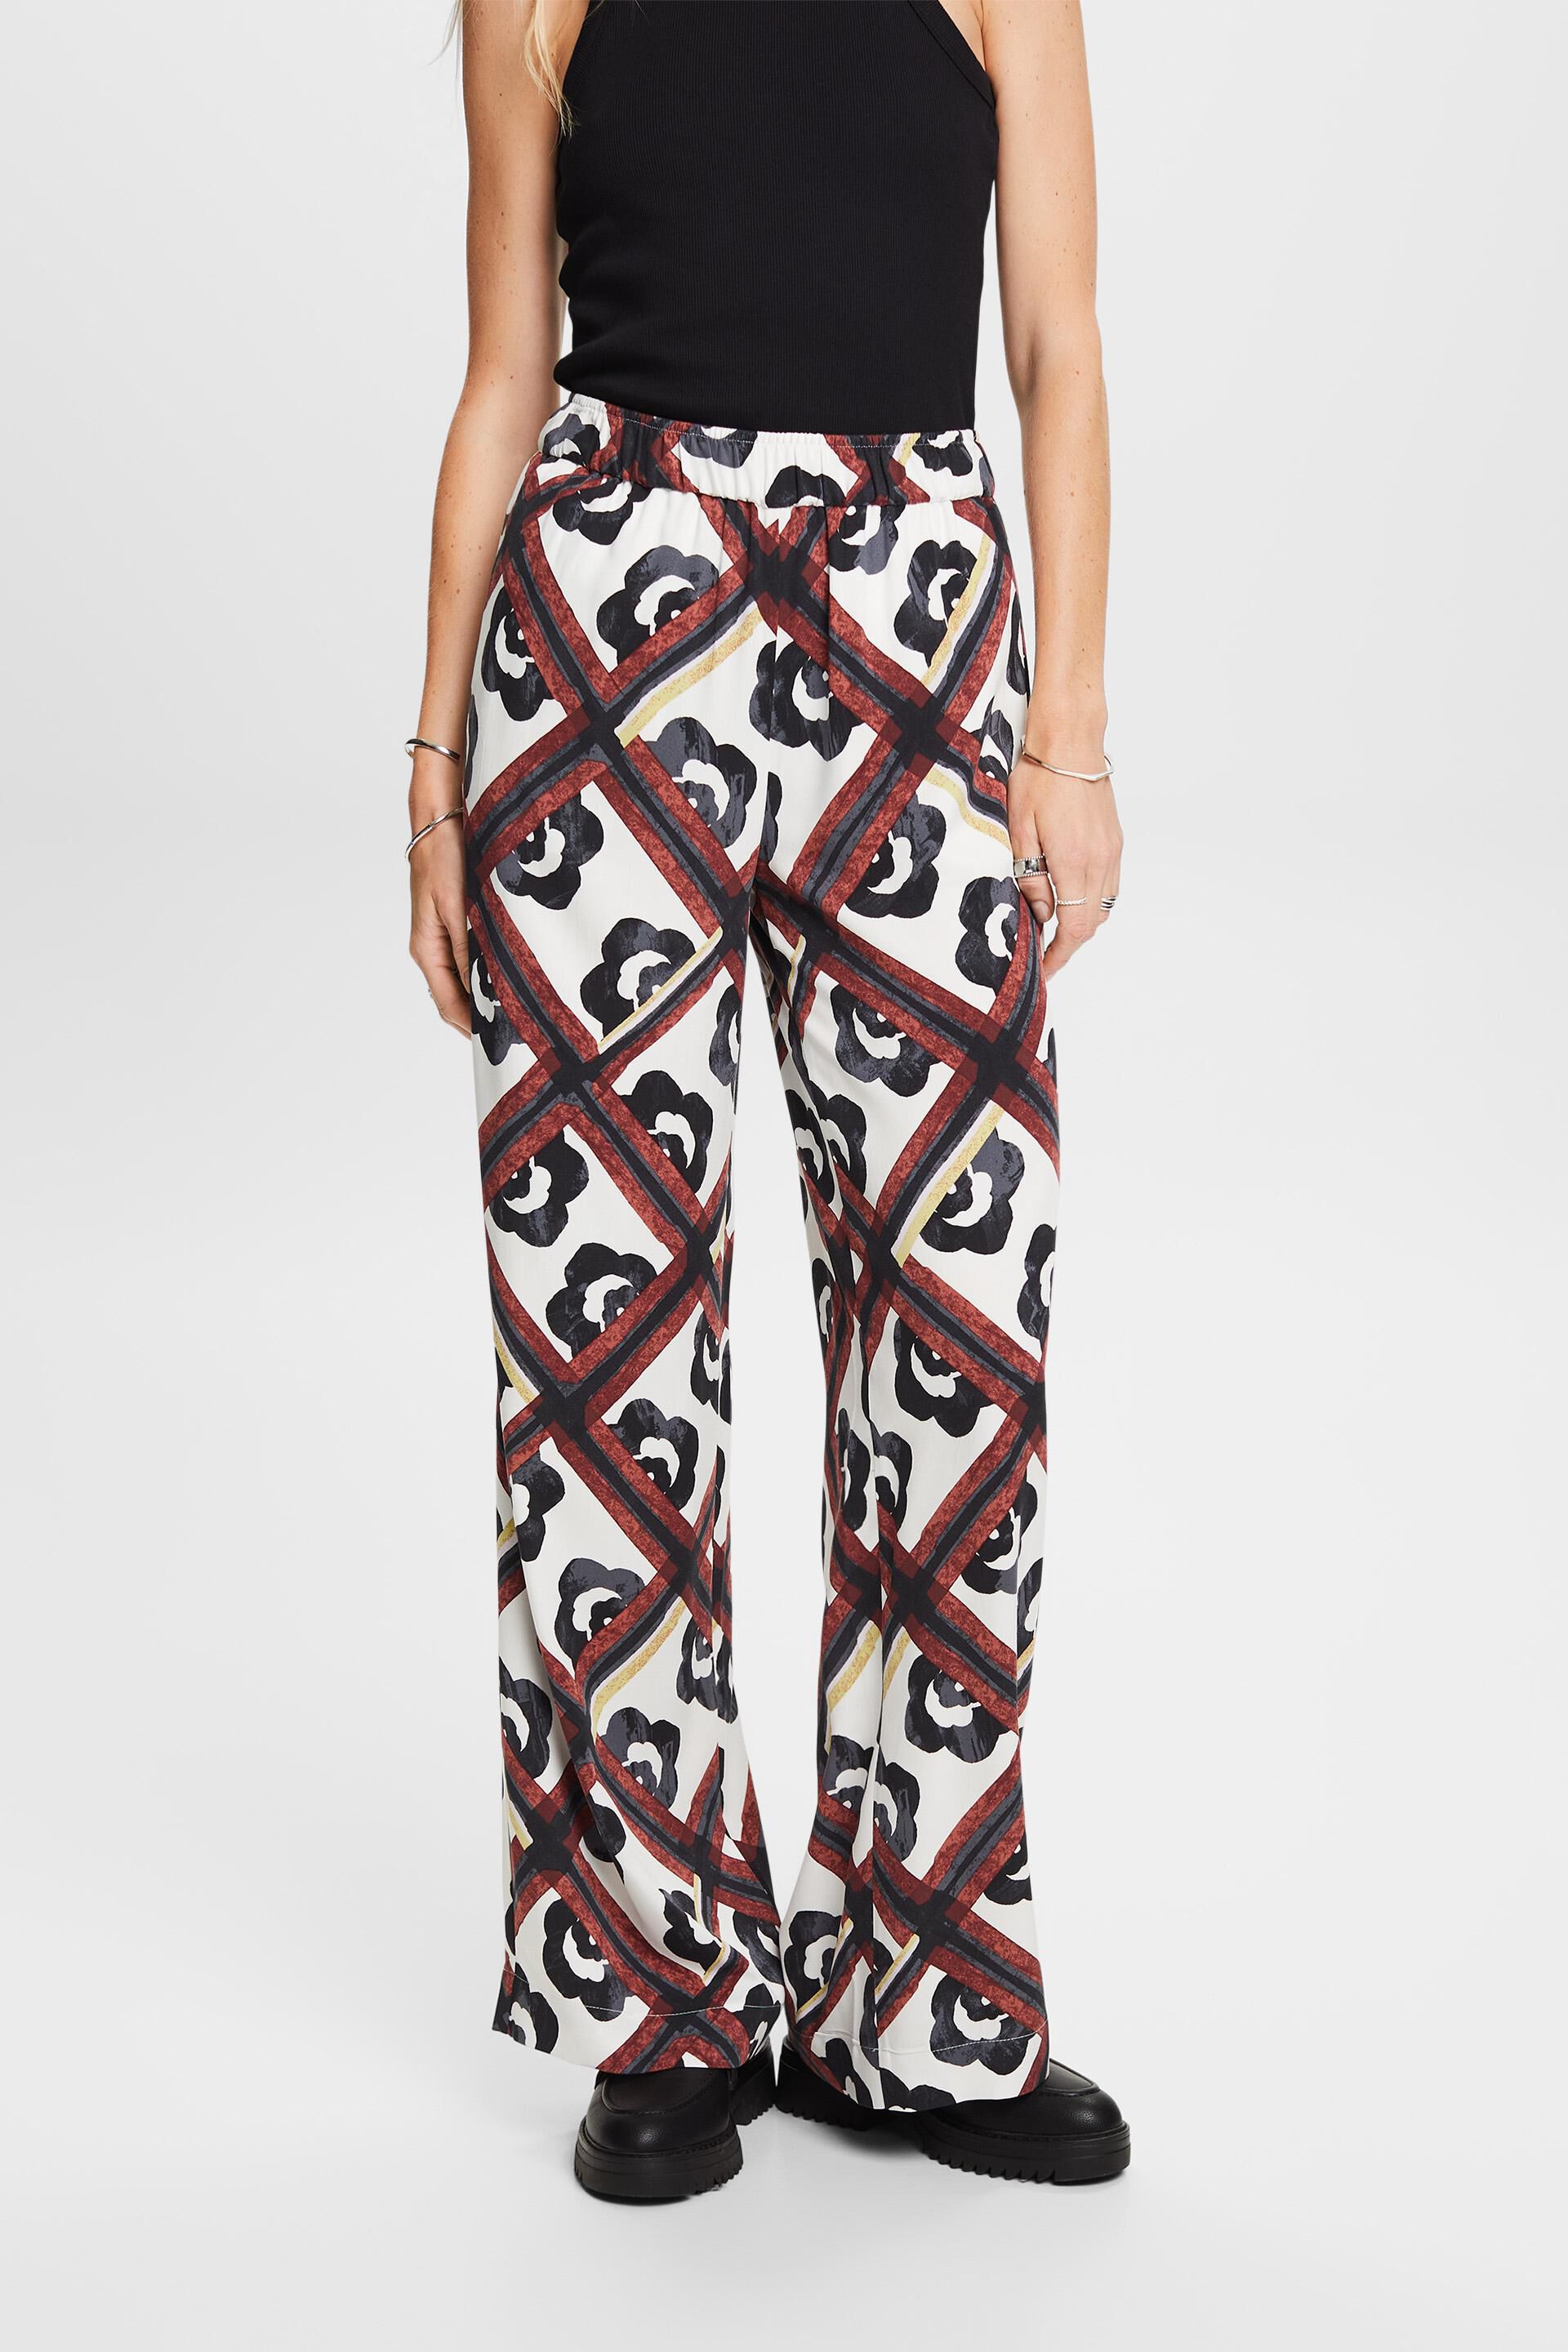 Esprit Patterned trousers, LENZING™ pull-on ECOVERO™